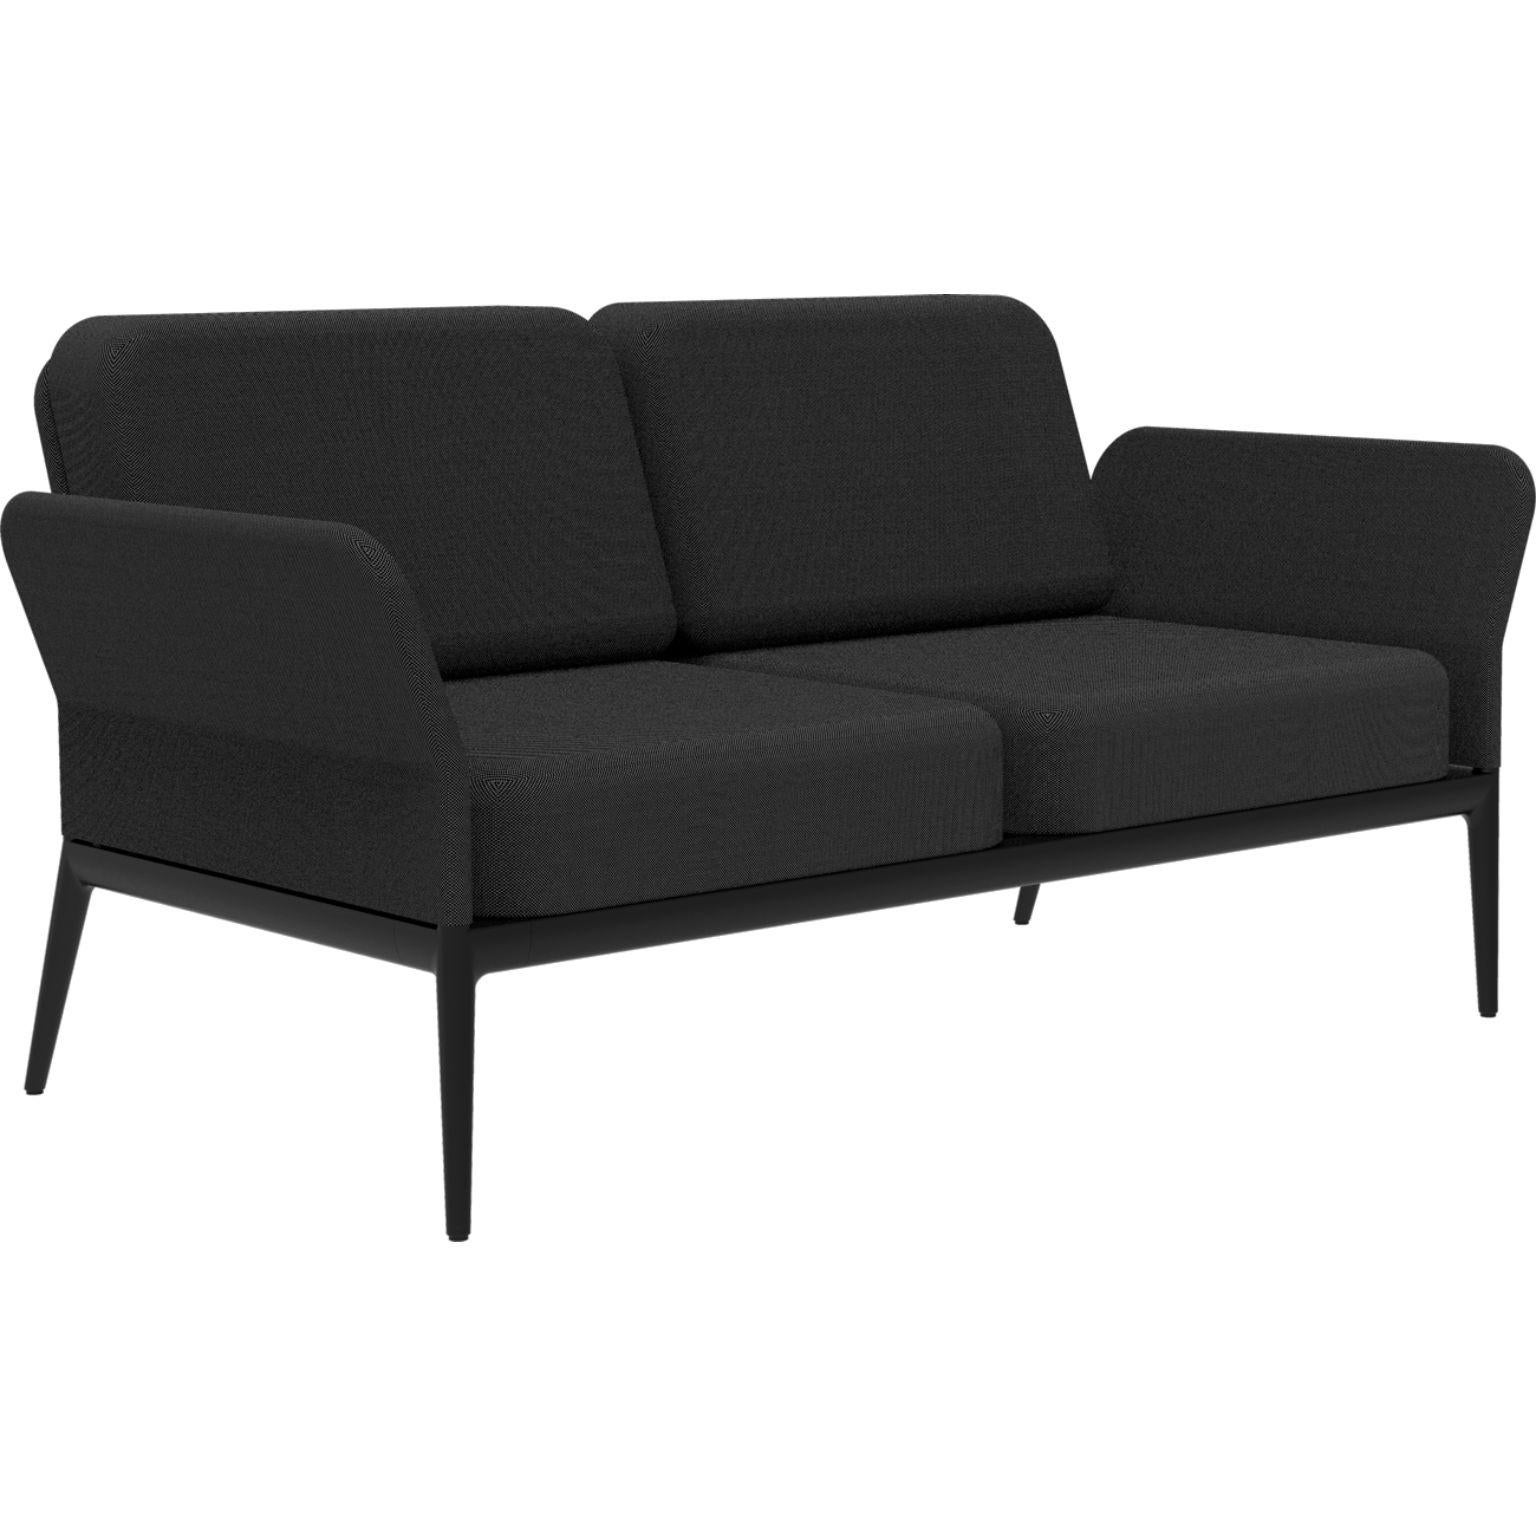 Cover black sofa by MOWEE
Dimensions: D83 x W160 x H81 cm (seat height 42 cm).
Material: Aluminum and upholstery.
Weight: 32 kg.
Also available in different colors and finishes. 

An unmistakable collection for its beauty and robustness. A